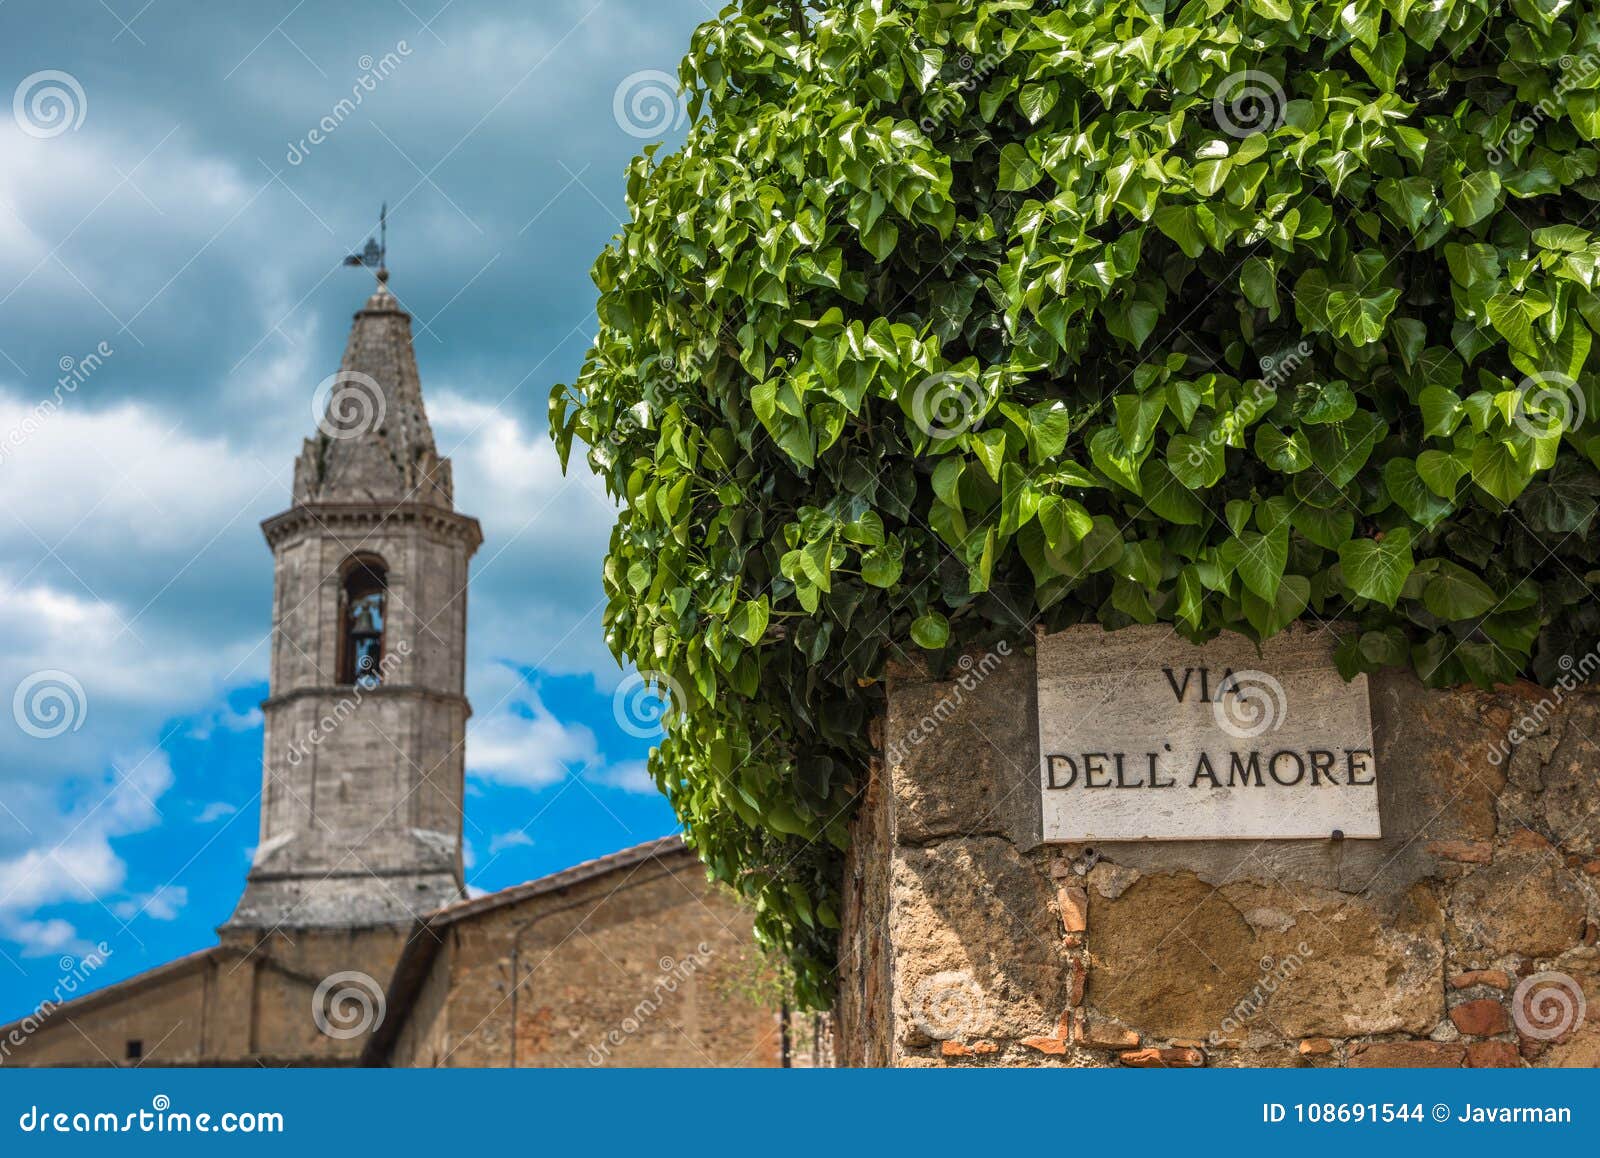 via dell` amore or love street in pienza, tuscany, italy